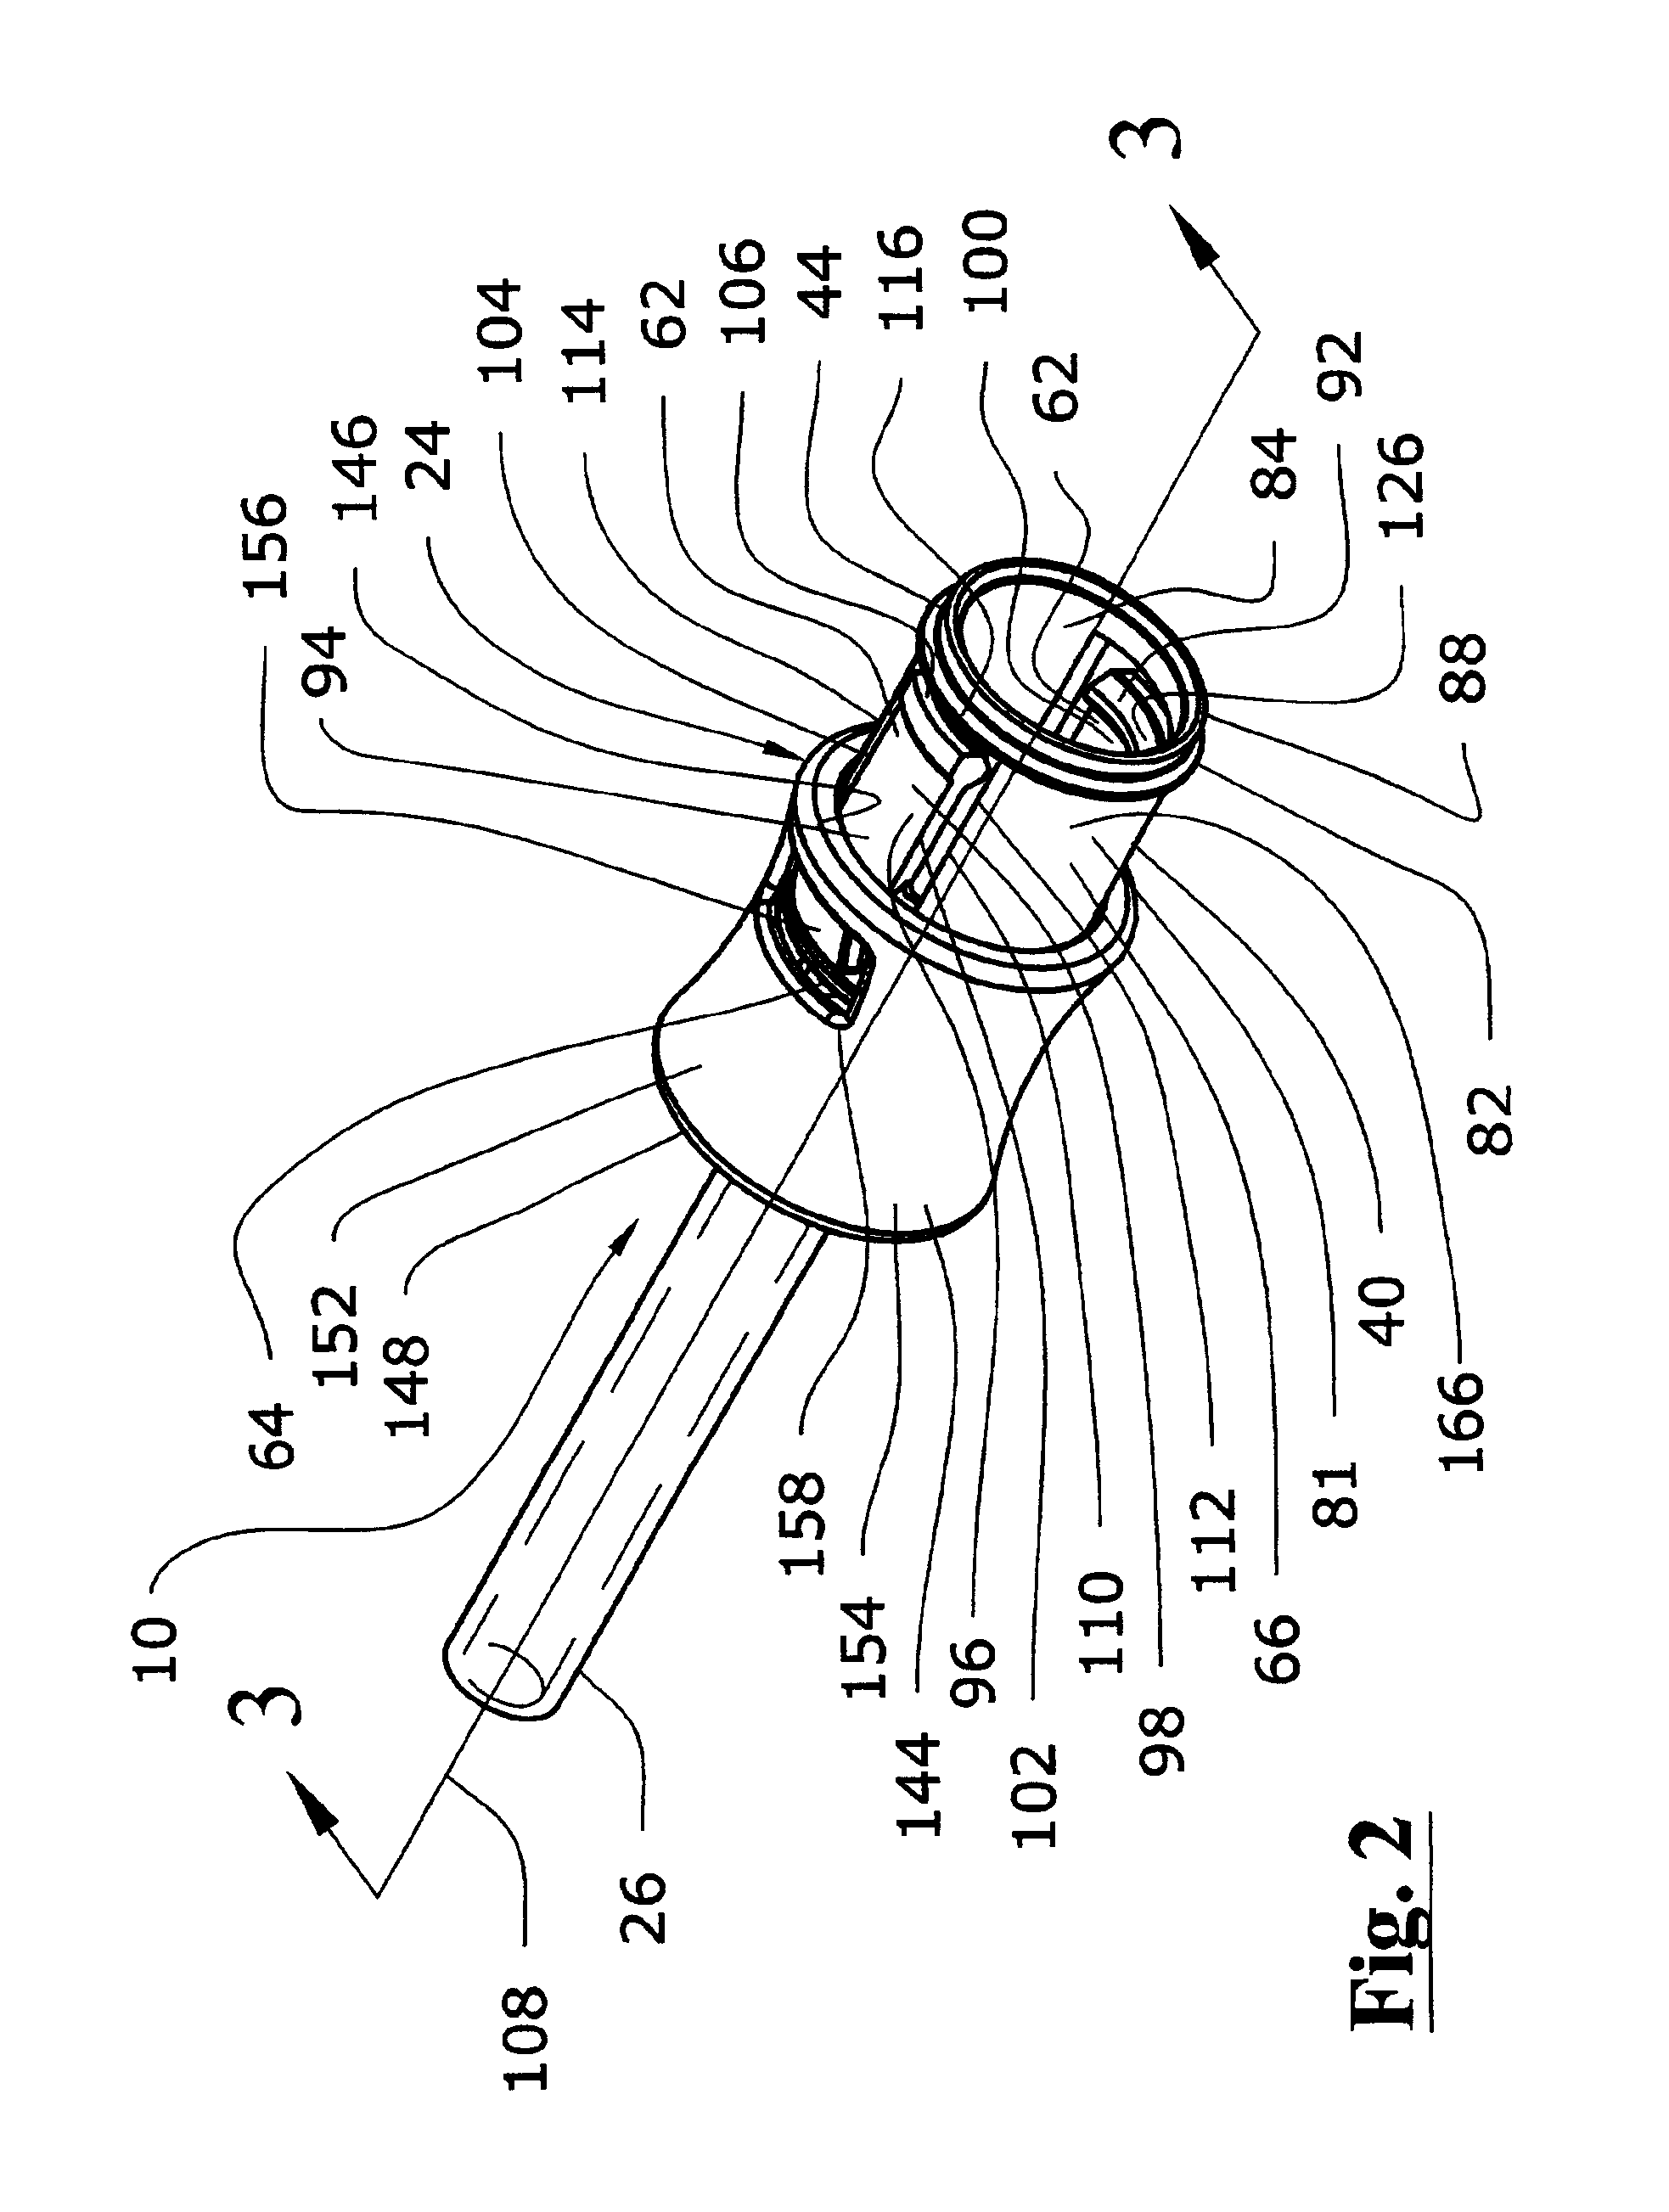 Refrigerant material transfer device and method